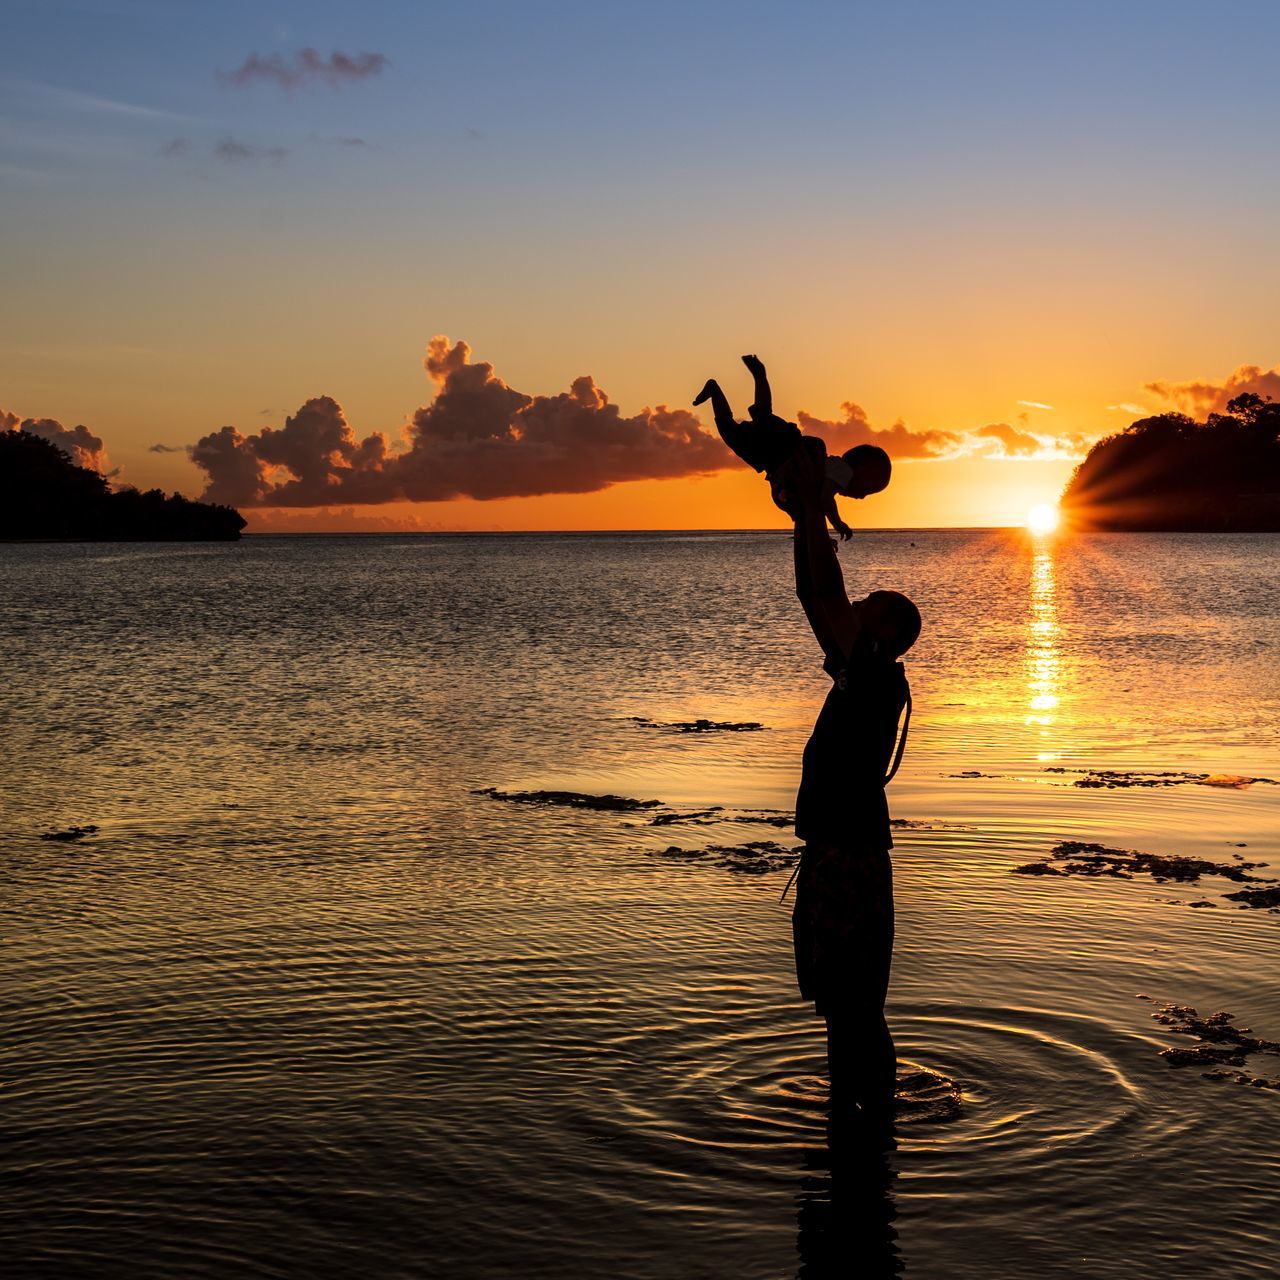 sunset, sky, water, silhouette, beauty in nature, real people, lifestyles, one person, beach, standing, orange color, scenics - nature, land, leisure activity, sea, tranquility, nature, full length, arms raised, human arm, sun, outdoors